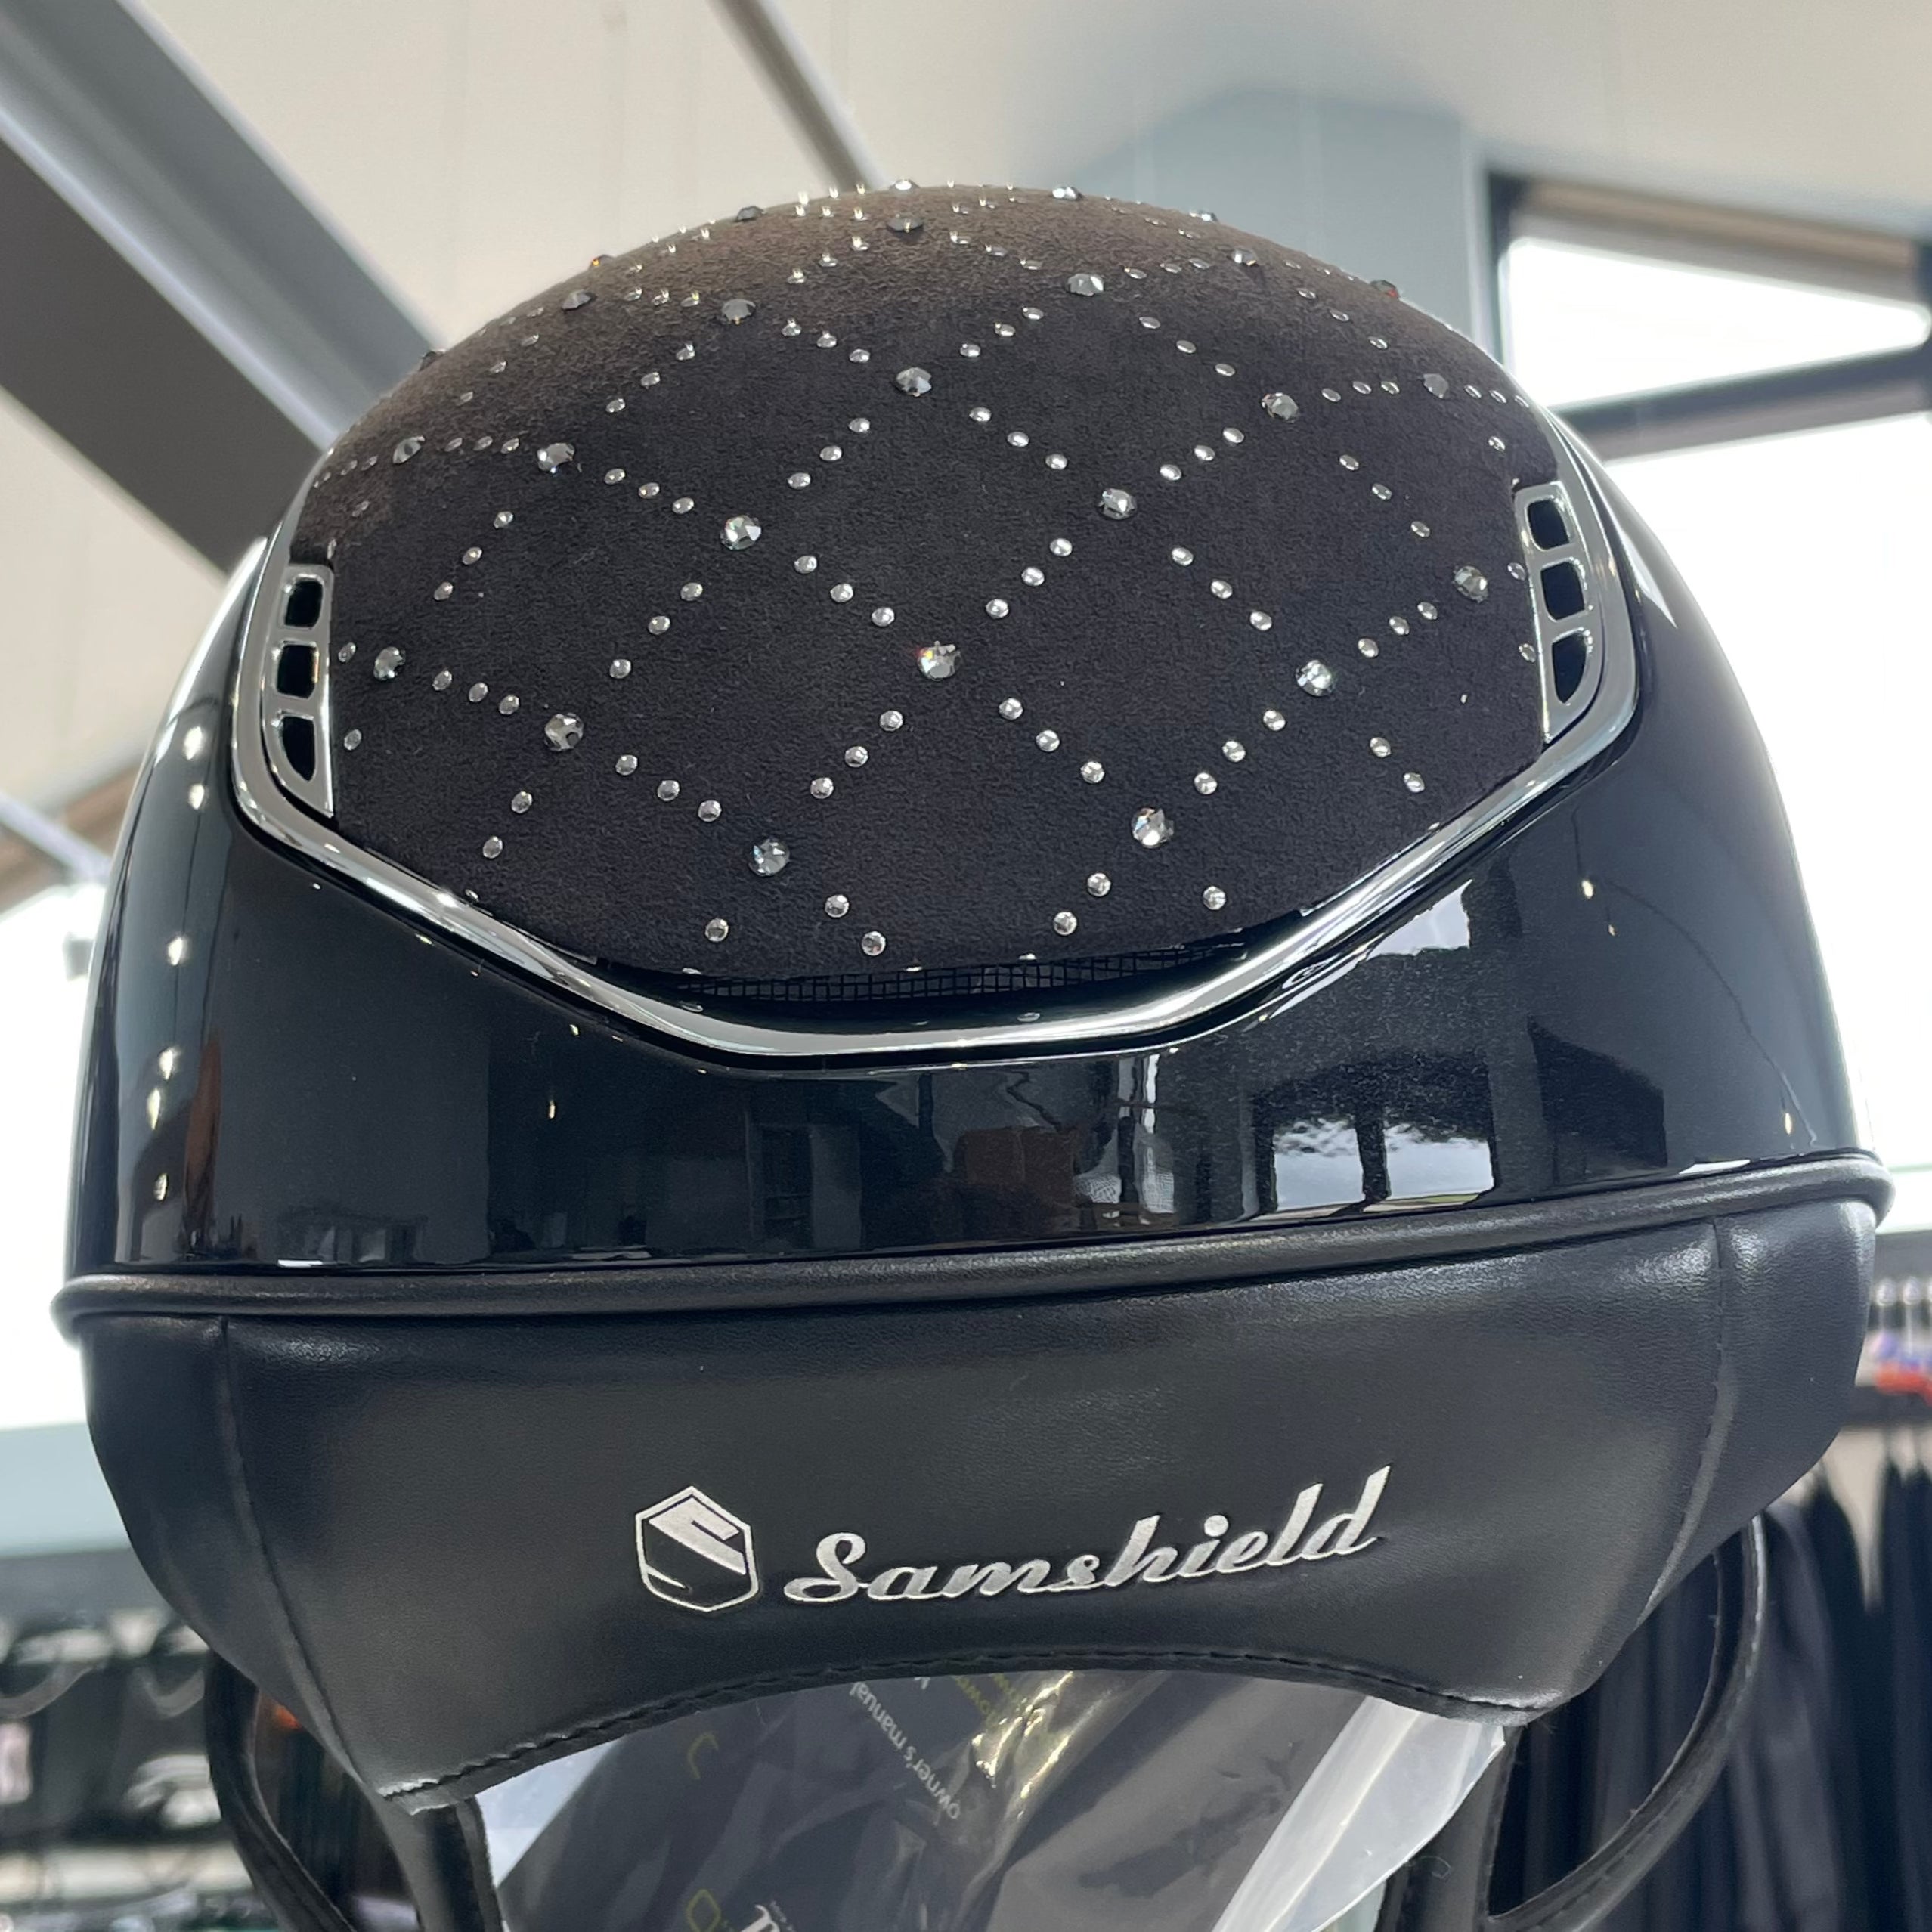 Samshield MissShield Black with Lozenge crystal and swarovski  2.0 M- in stock and ready to ship!